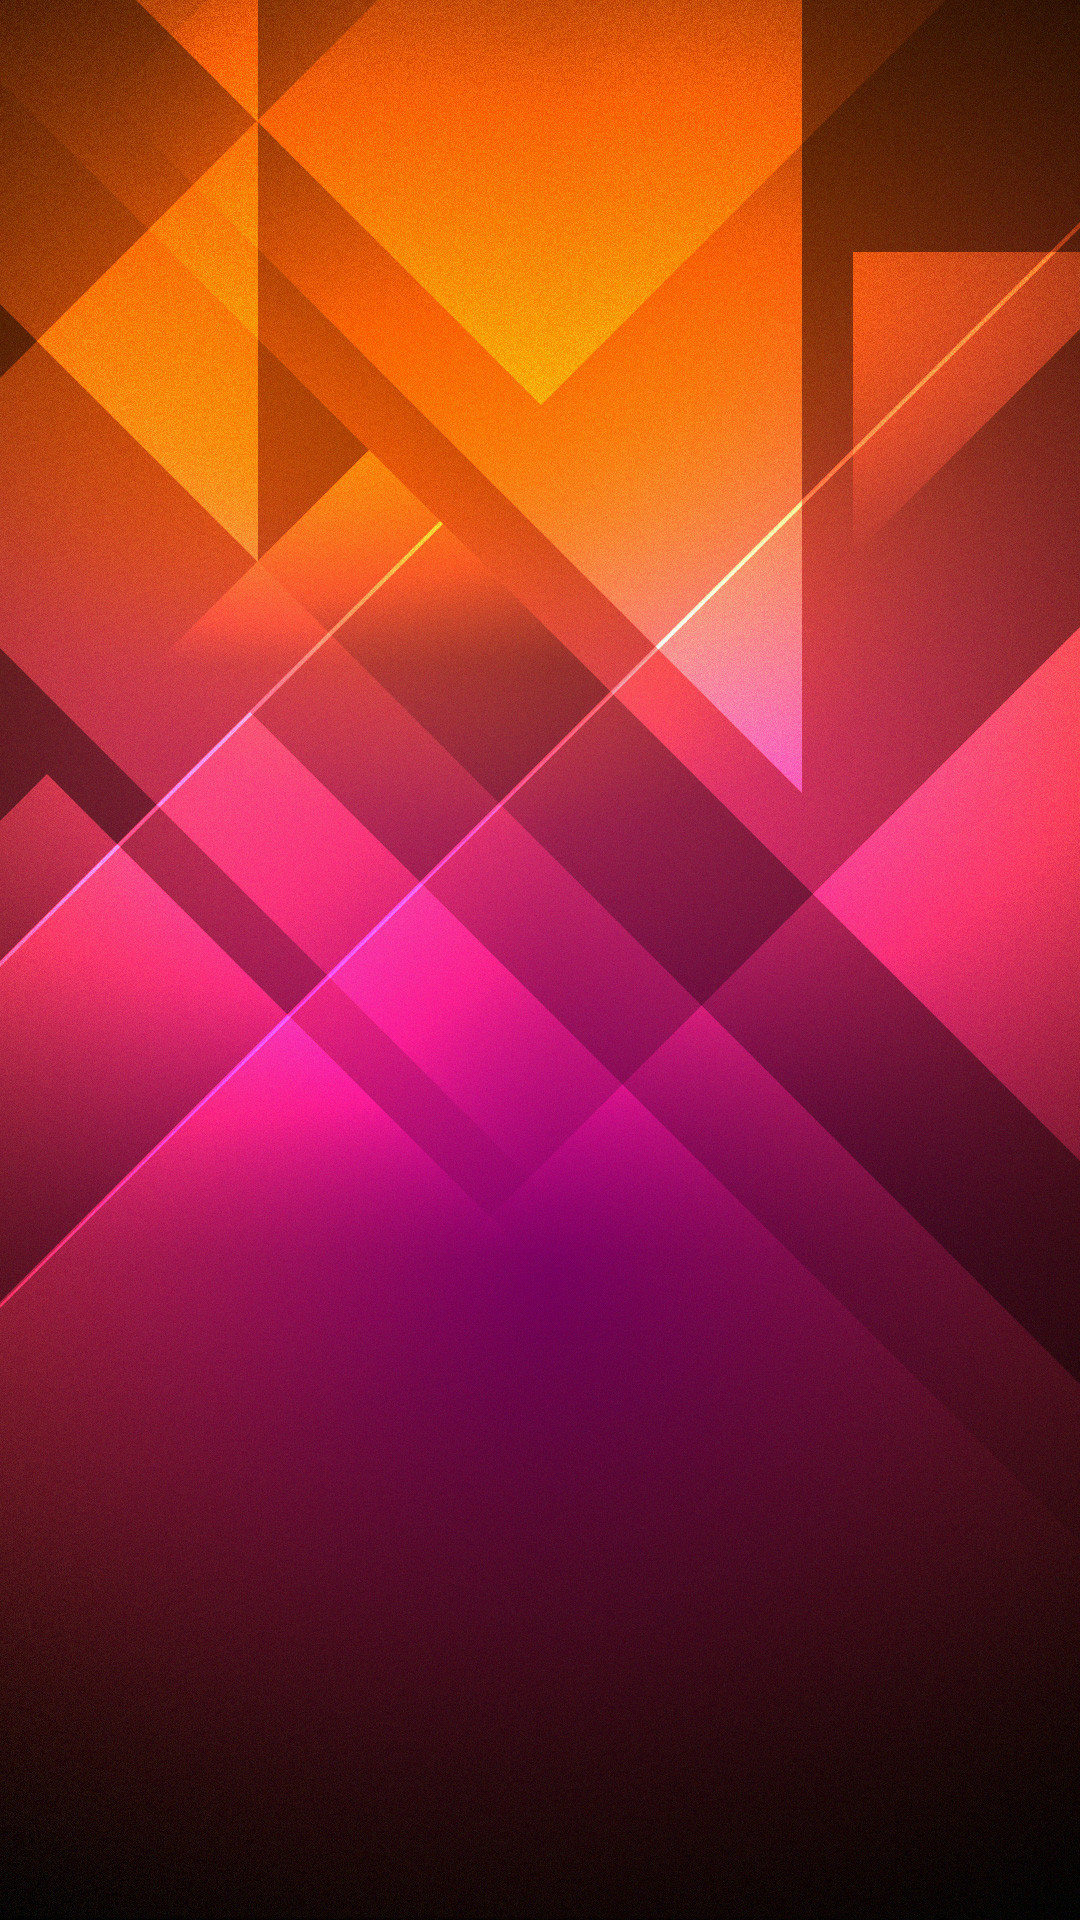 1080x1920 Customize your phone with HTC new Sense 5 wallpaper collection – HTC Source